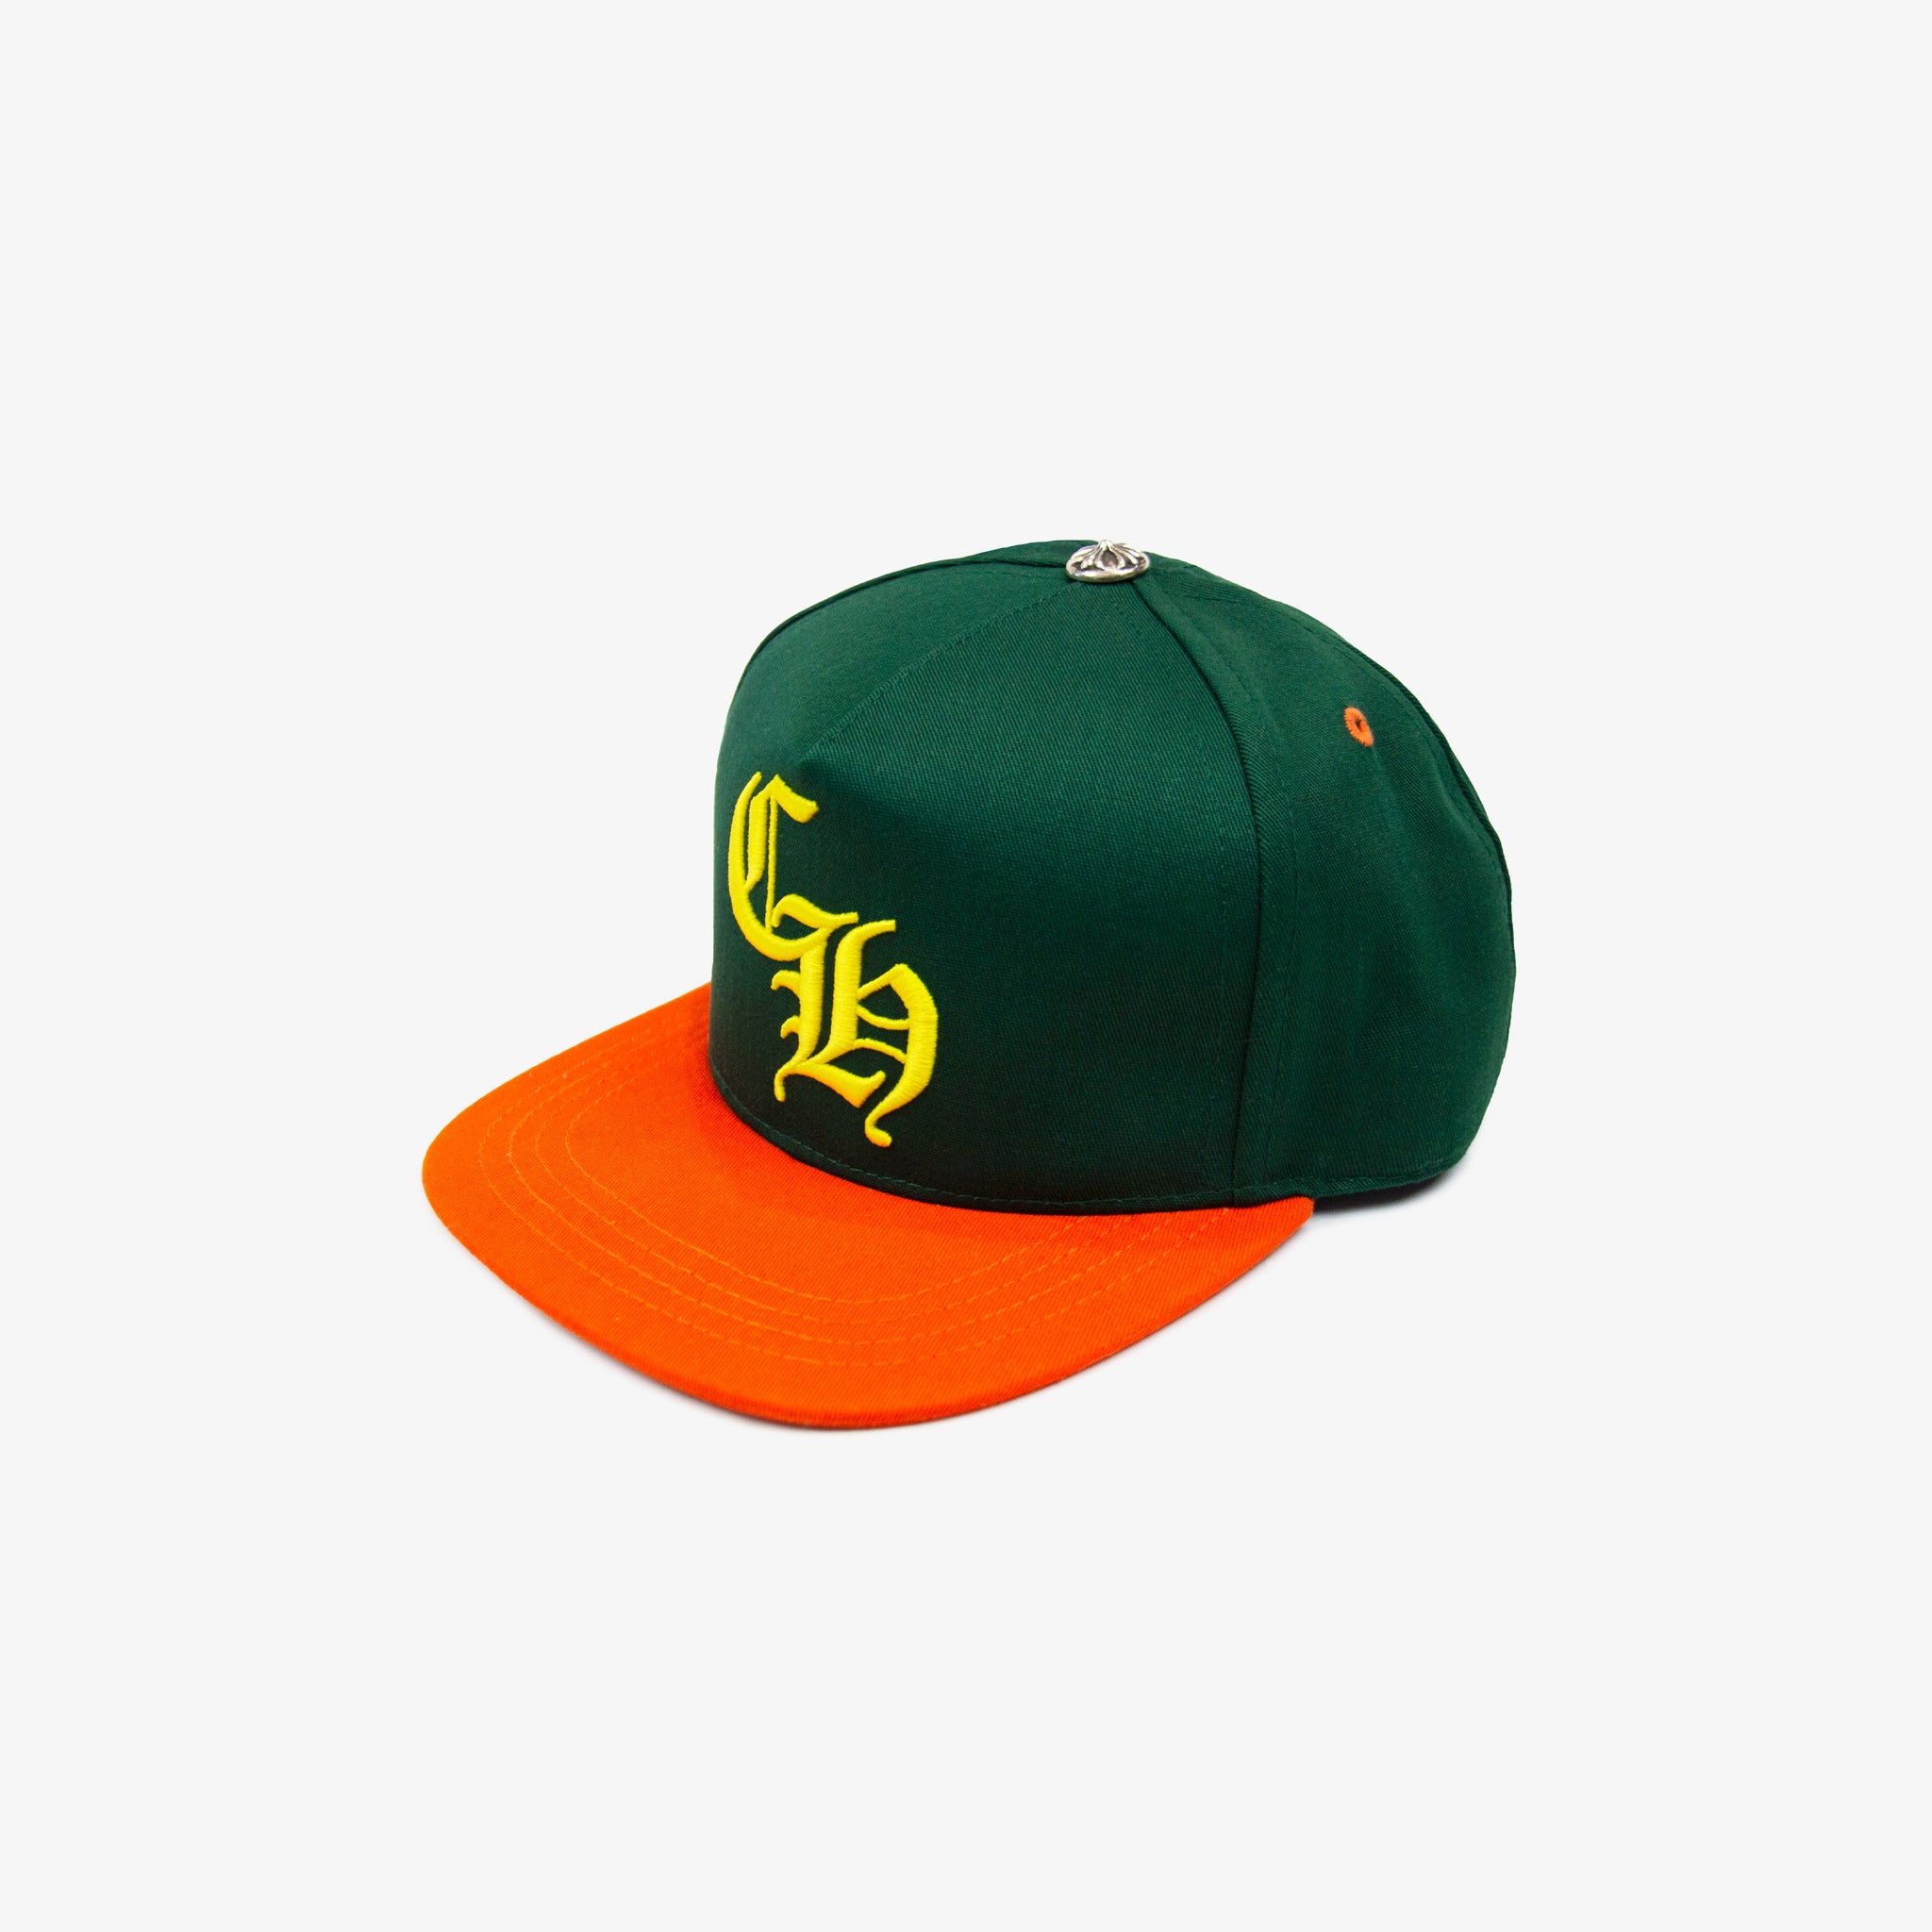 CHROME HEARTS OAKLAND A'S EXCLUSIVE SNAPBACK – OBTAIND